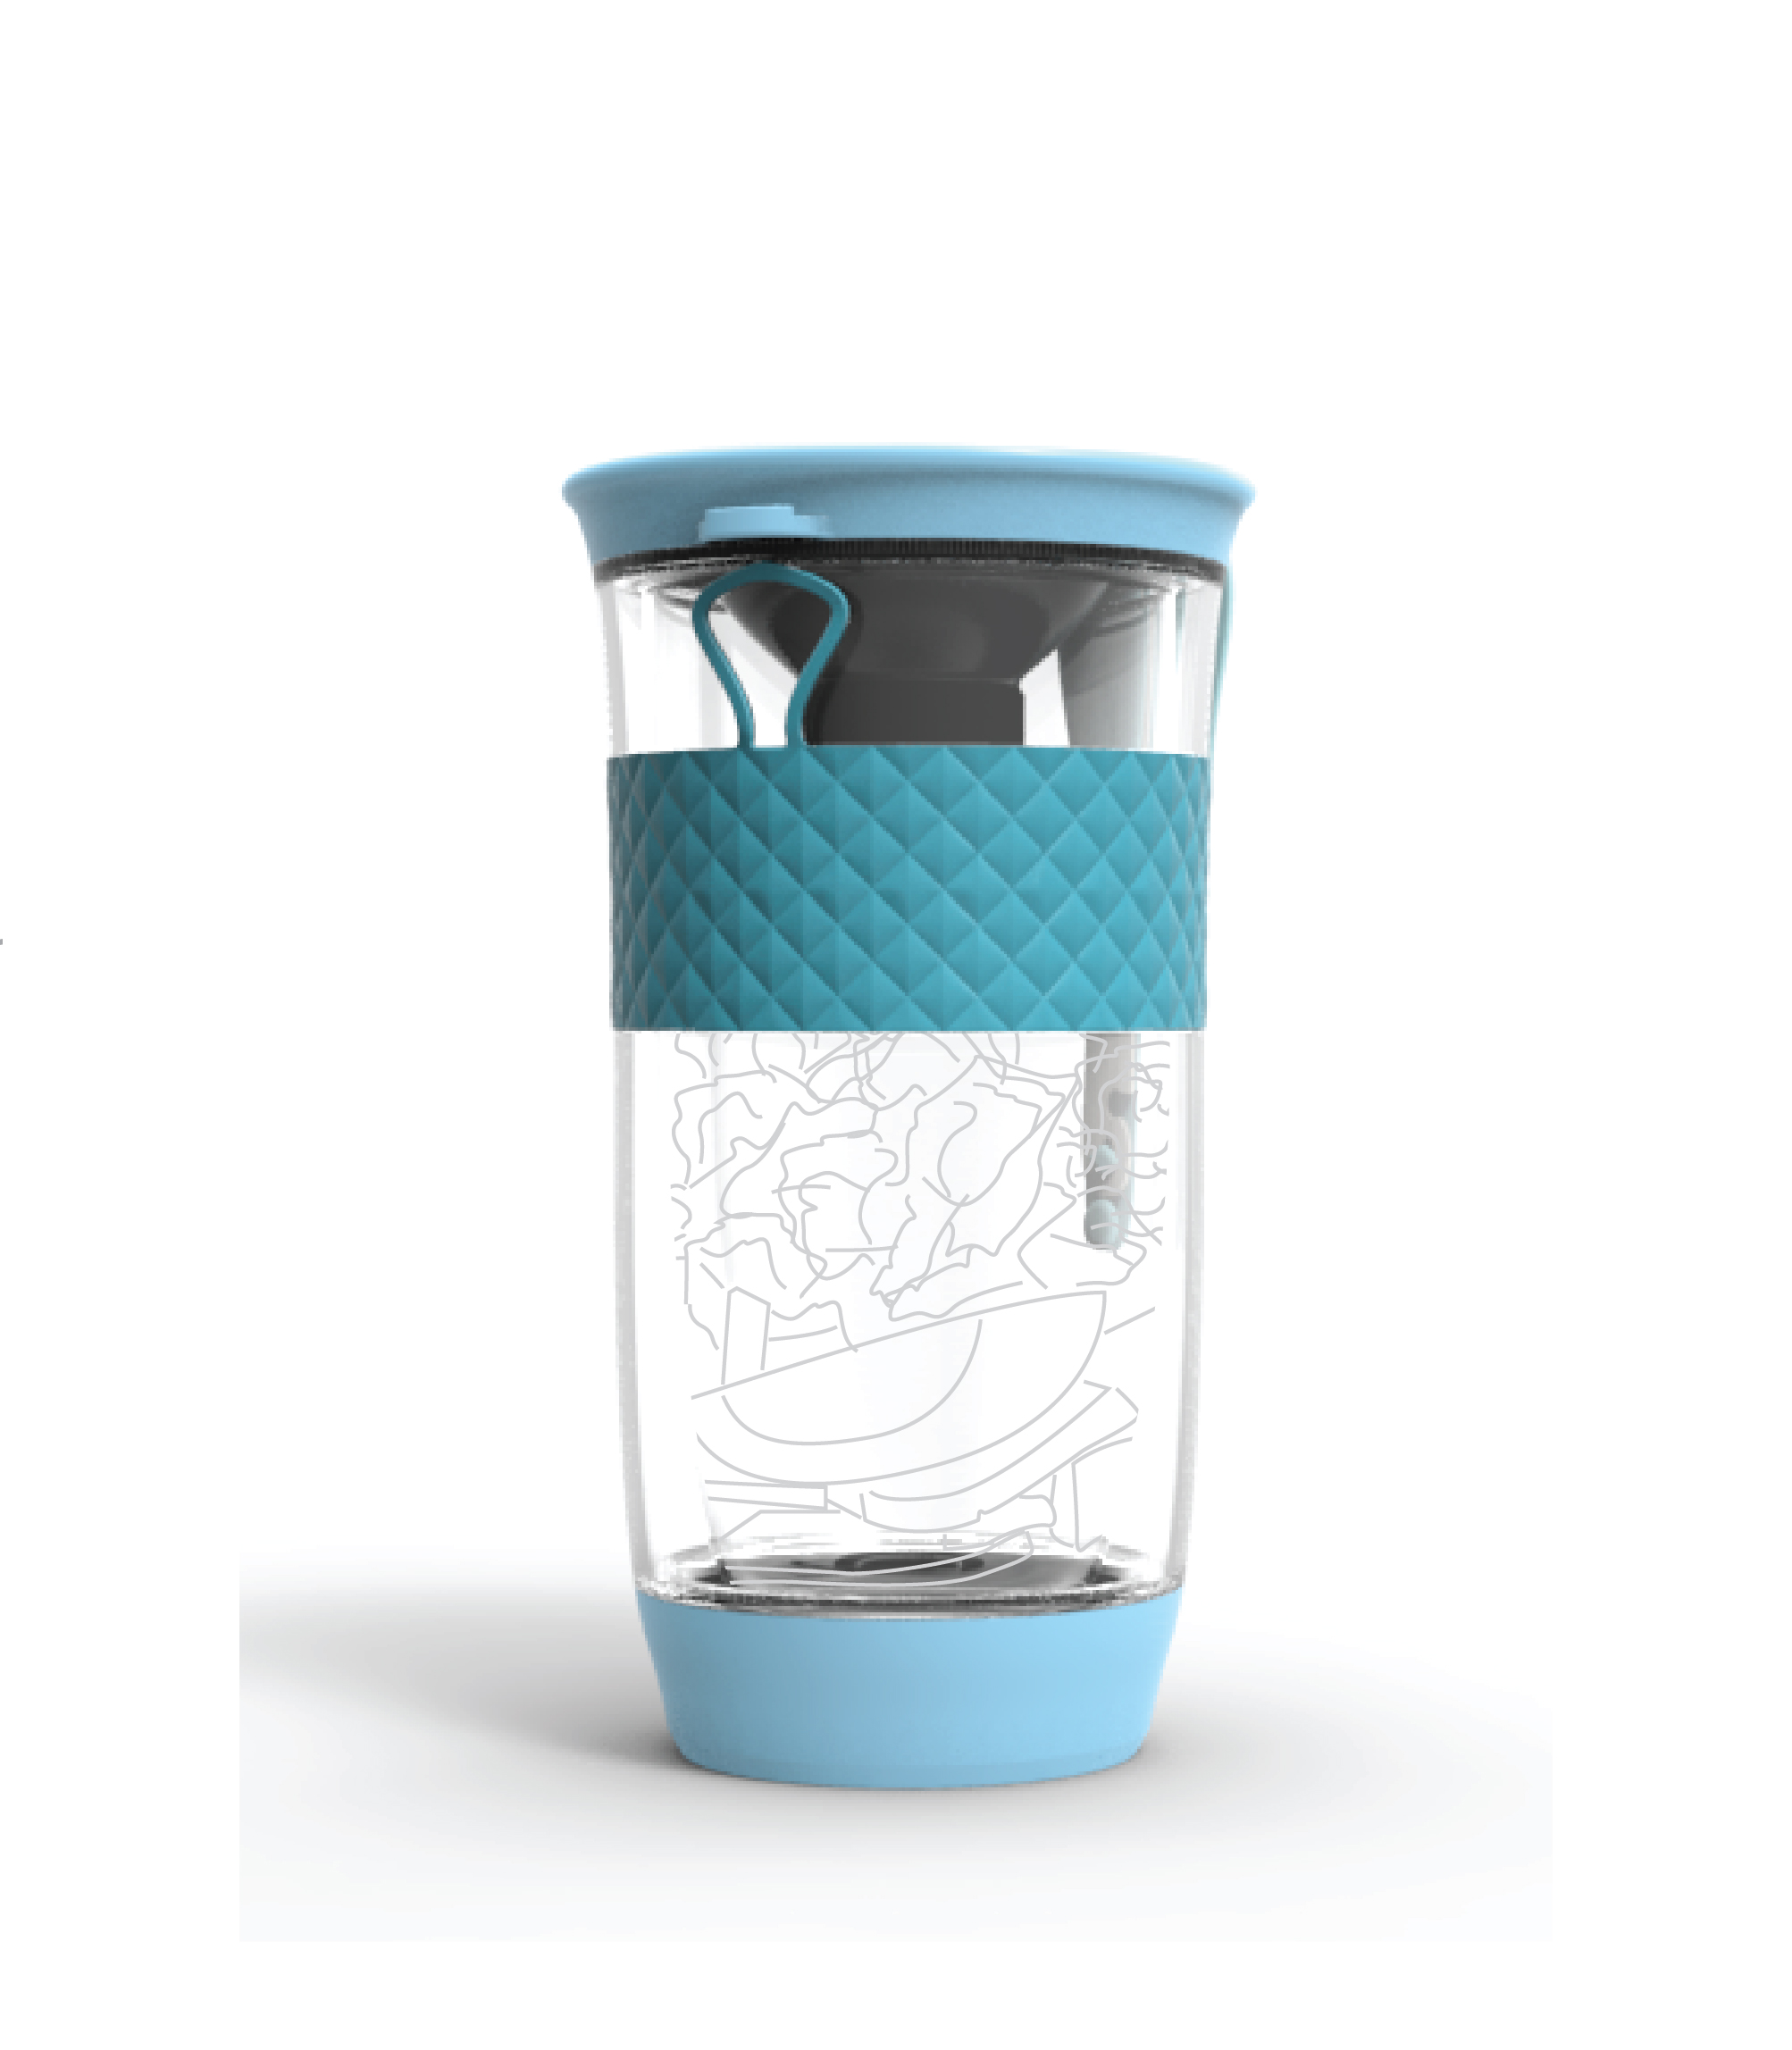 To-go salad shaker & container design